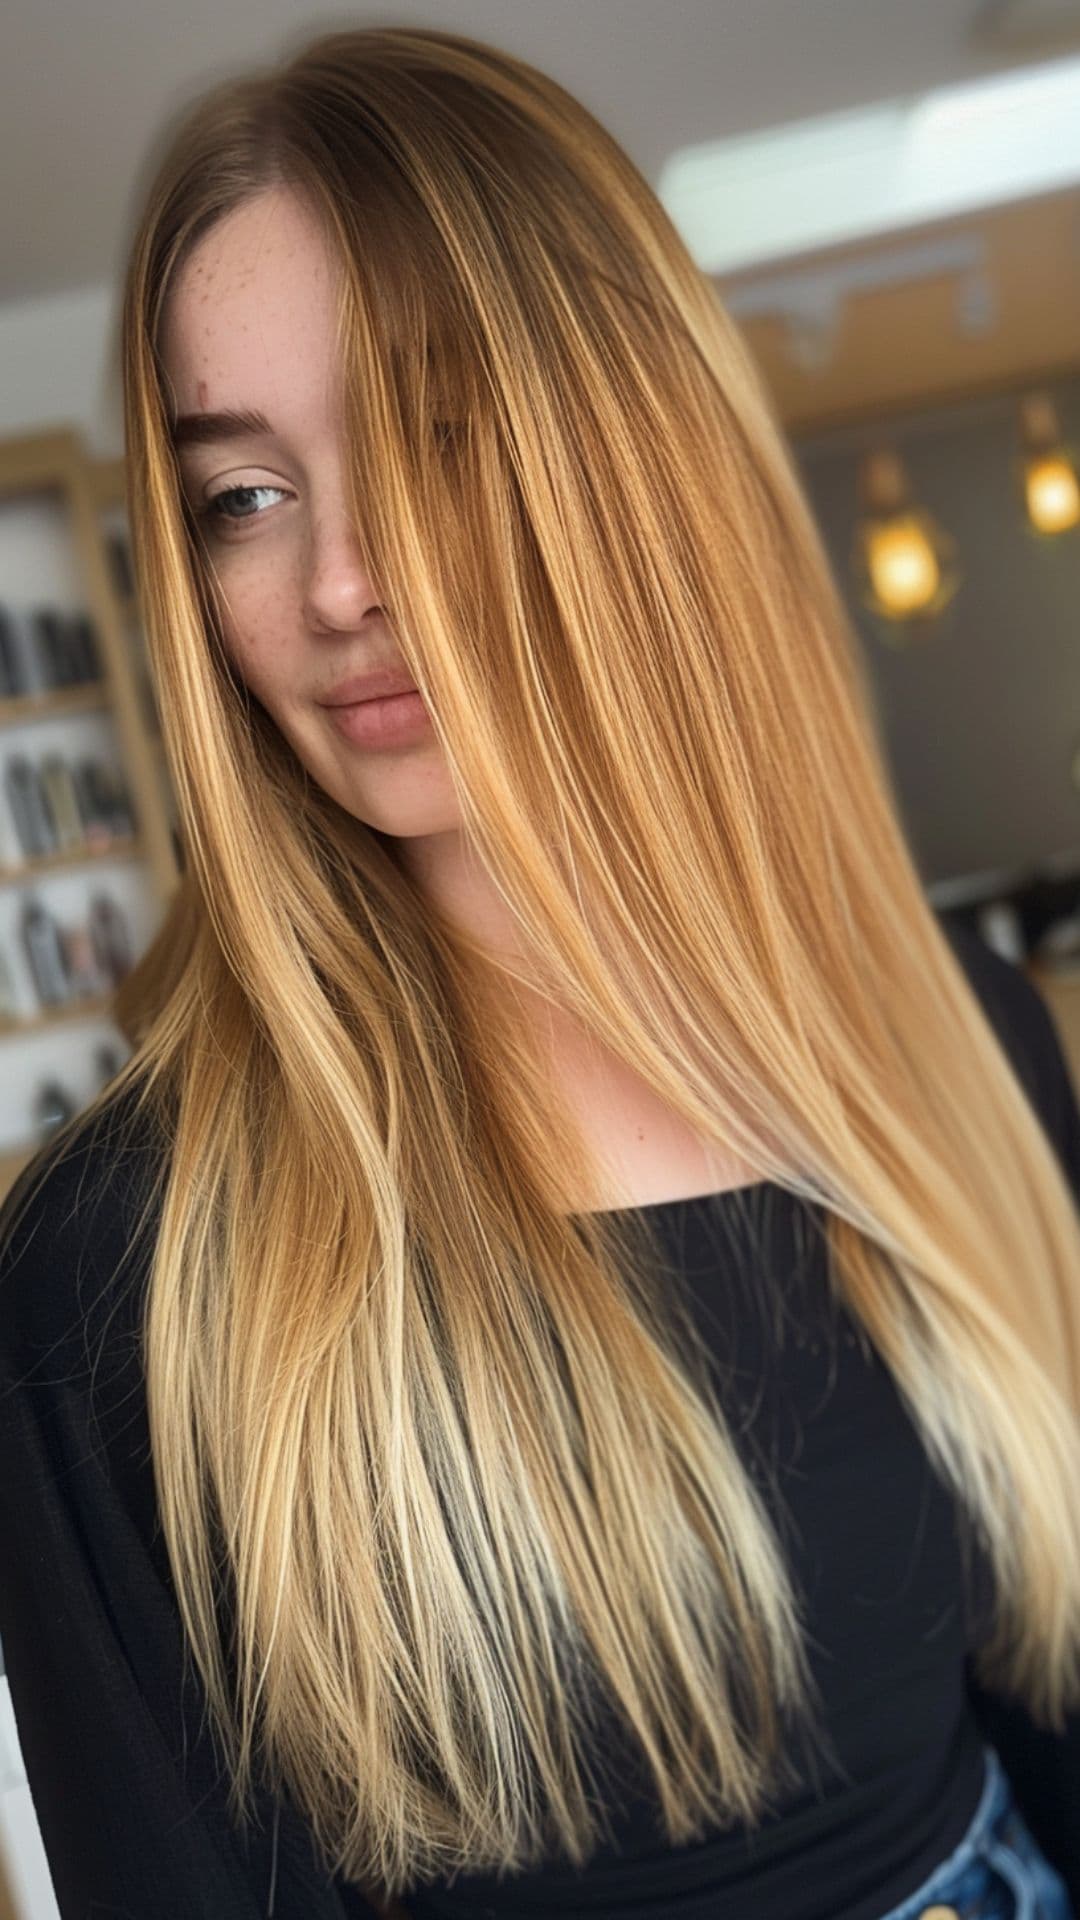 A woman modelling a brown and blonde ombre hair.